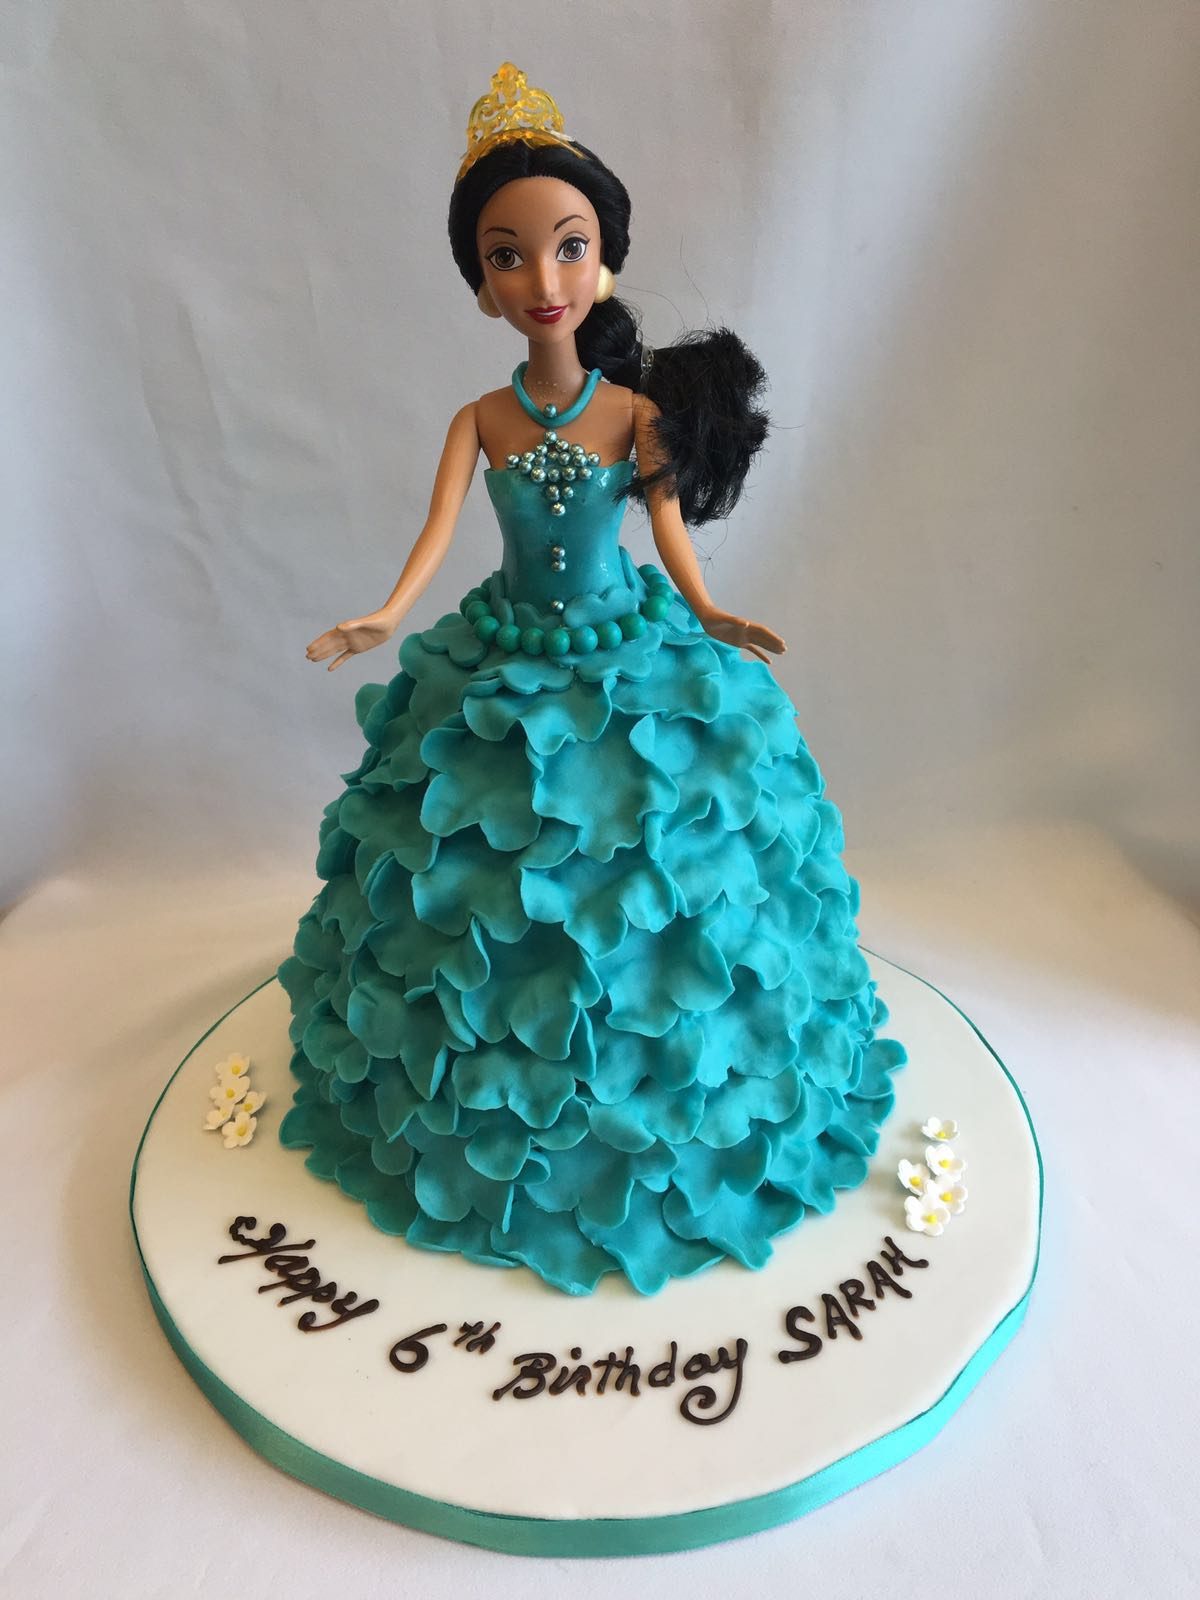 Princess Jasmine themed doll cake. Made by: Temptations Cakes. Order in Singapore at Recommend.sg